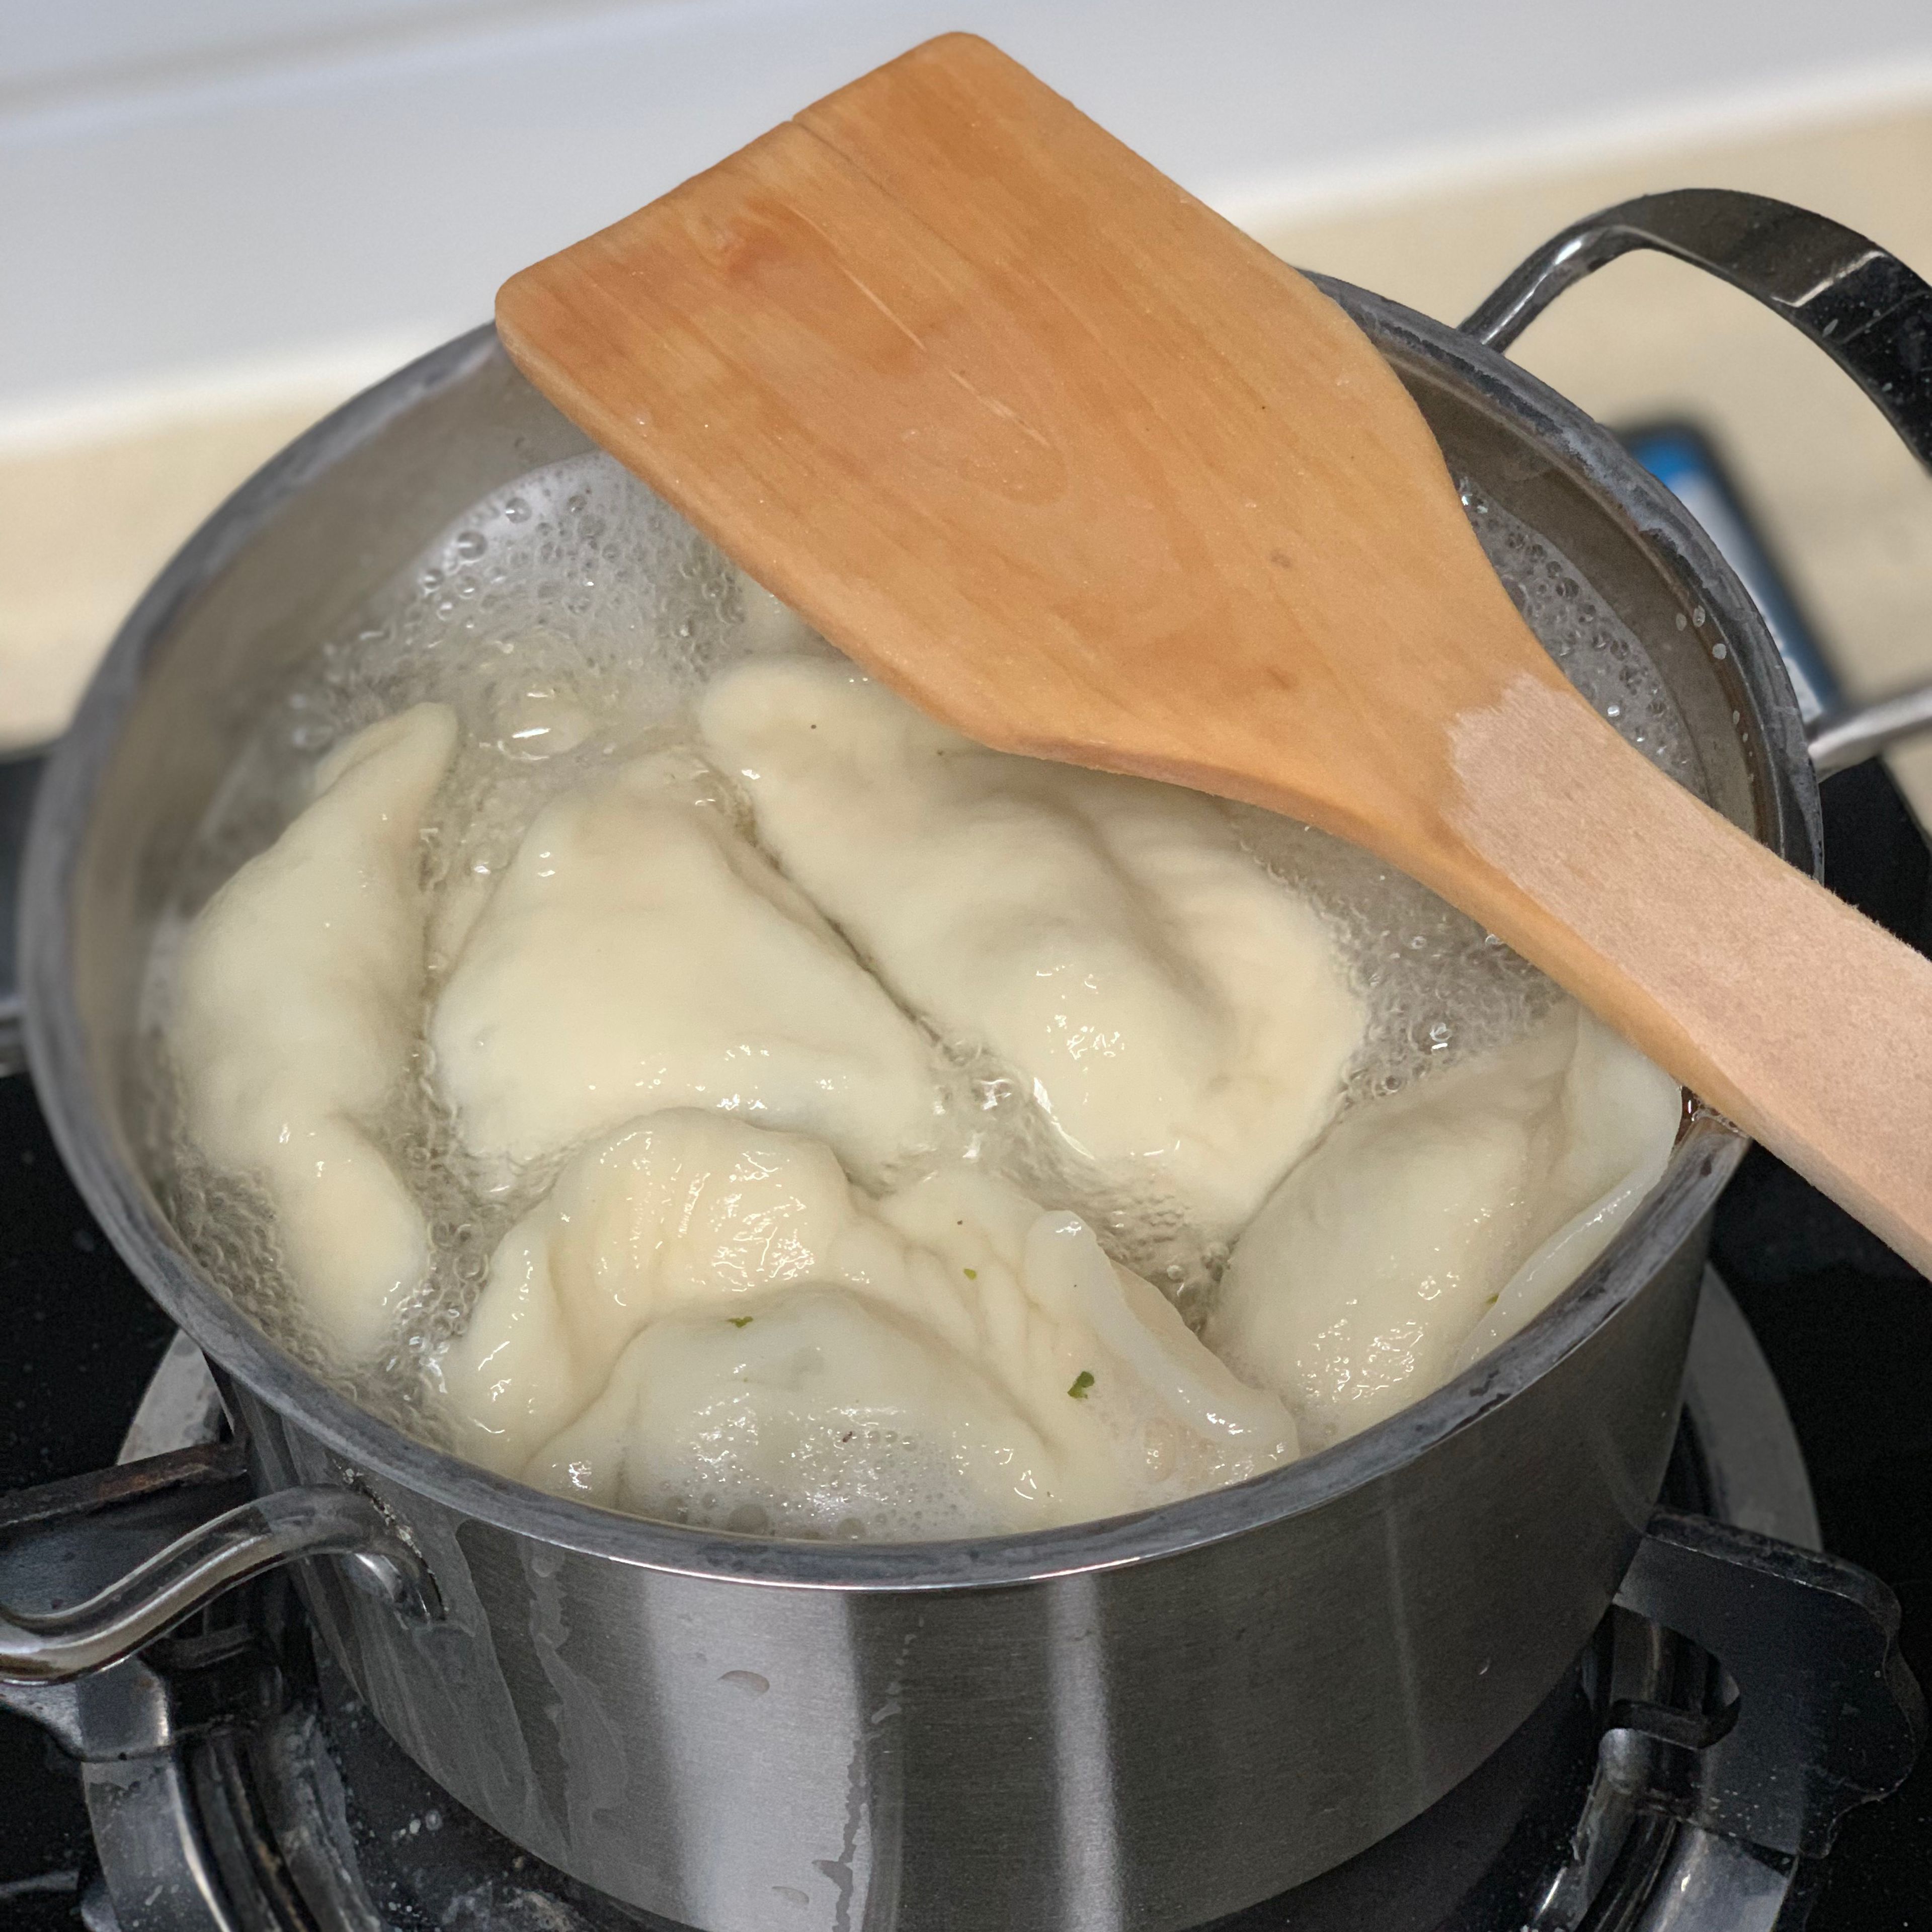 Half-fill a large saucepan with water and bring to a boil. Put inside the dumplings and cook them approximately 45 minutes.